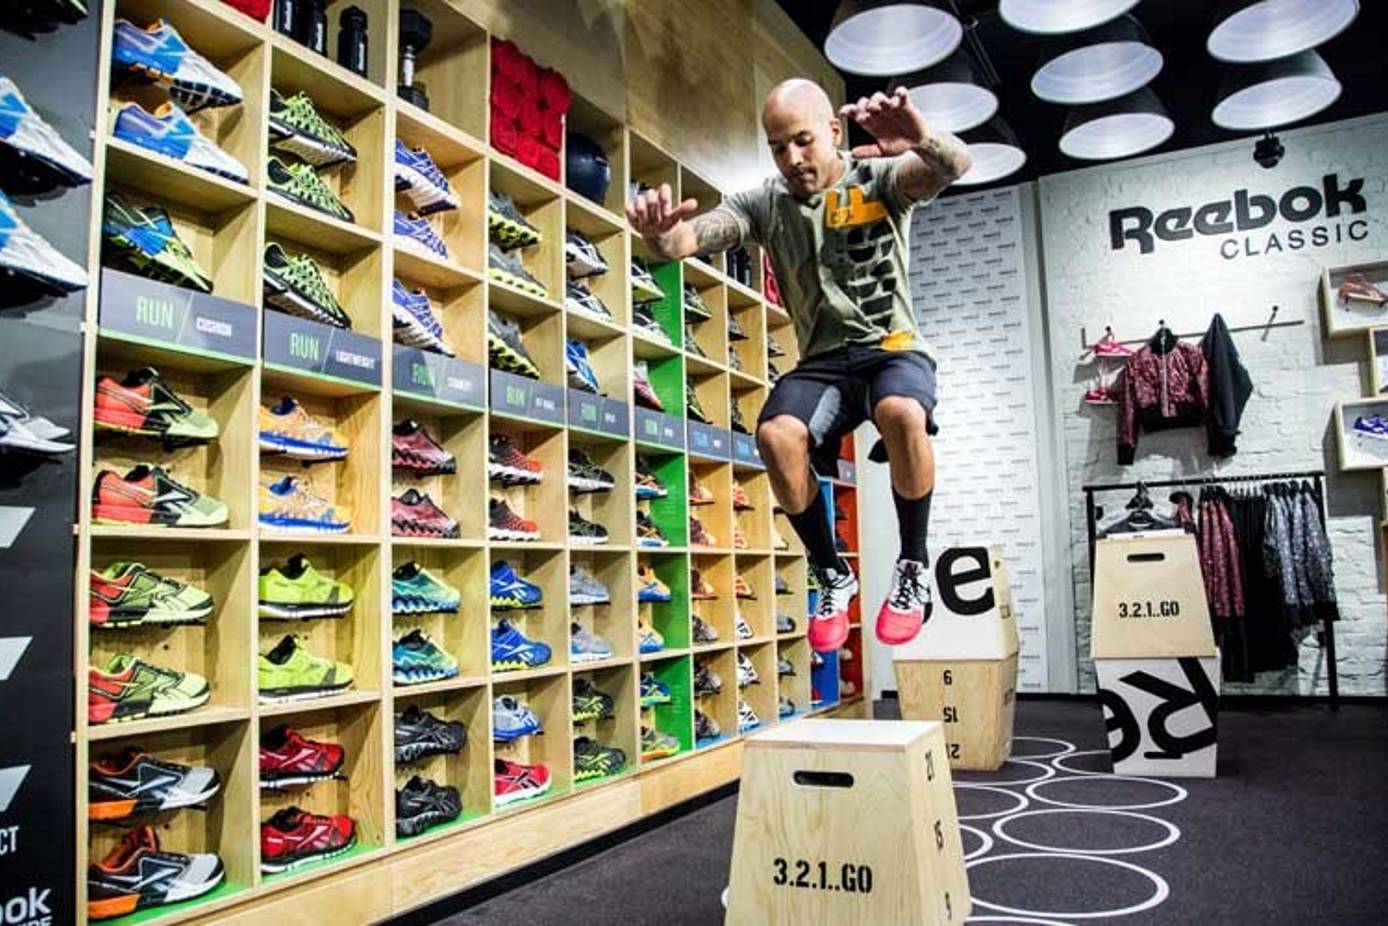 Reebok open 500 FitHub stores in China by 2020